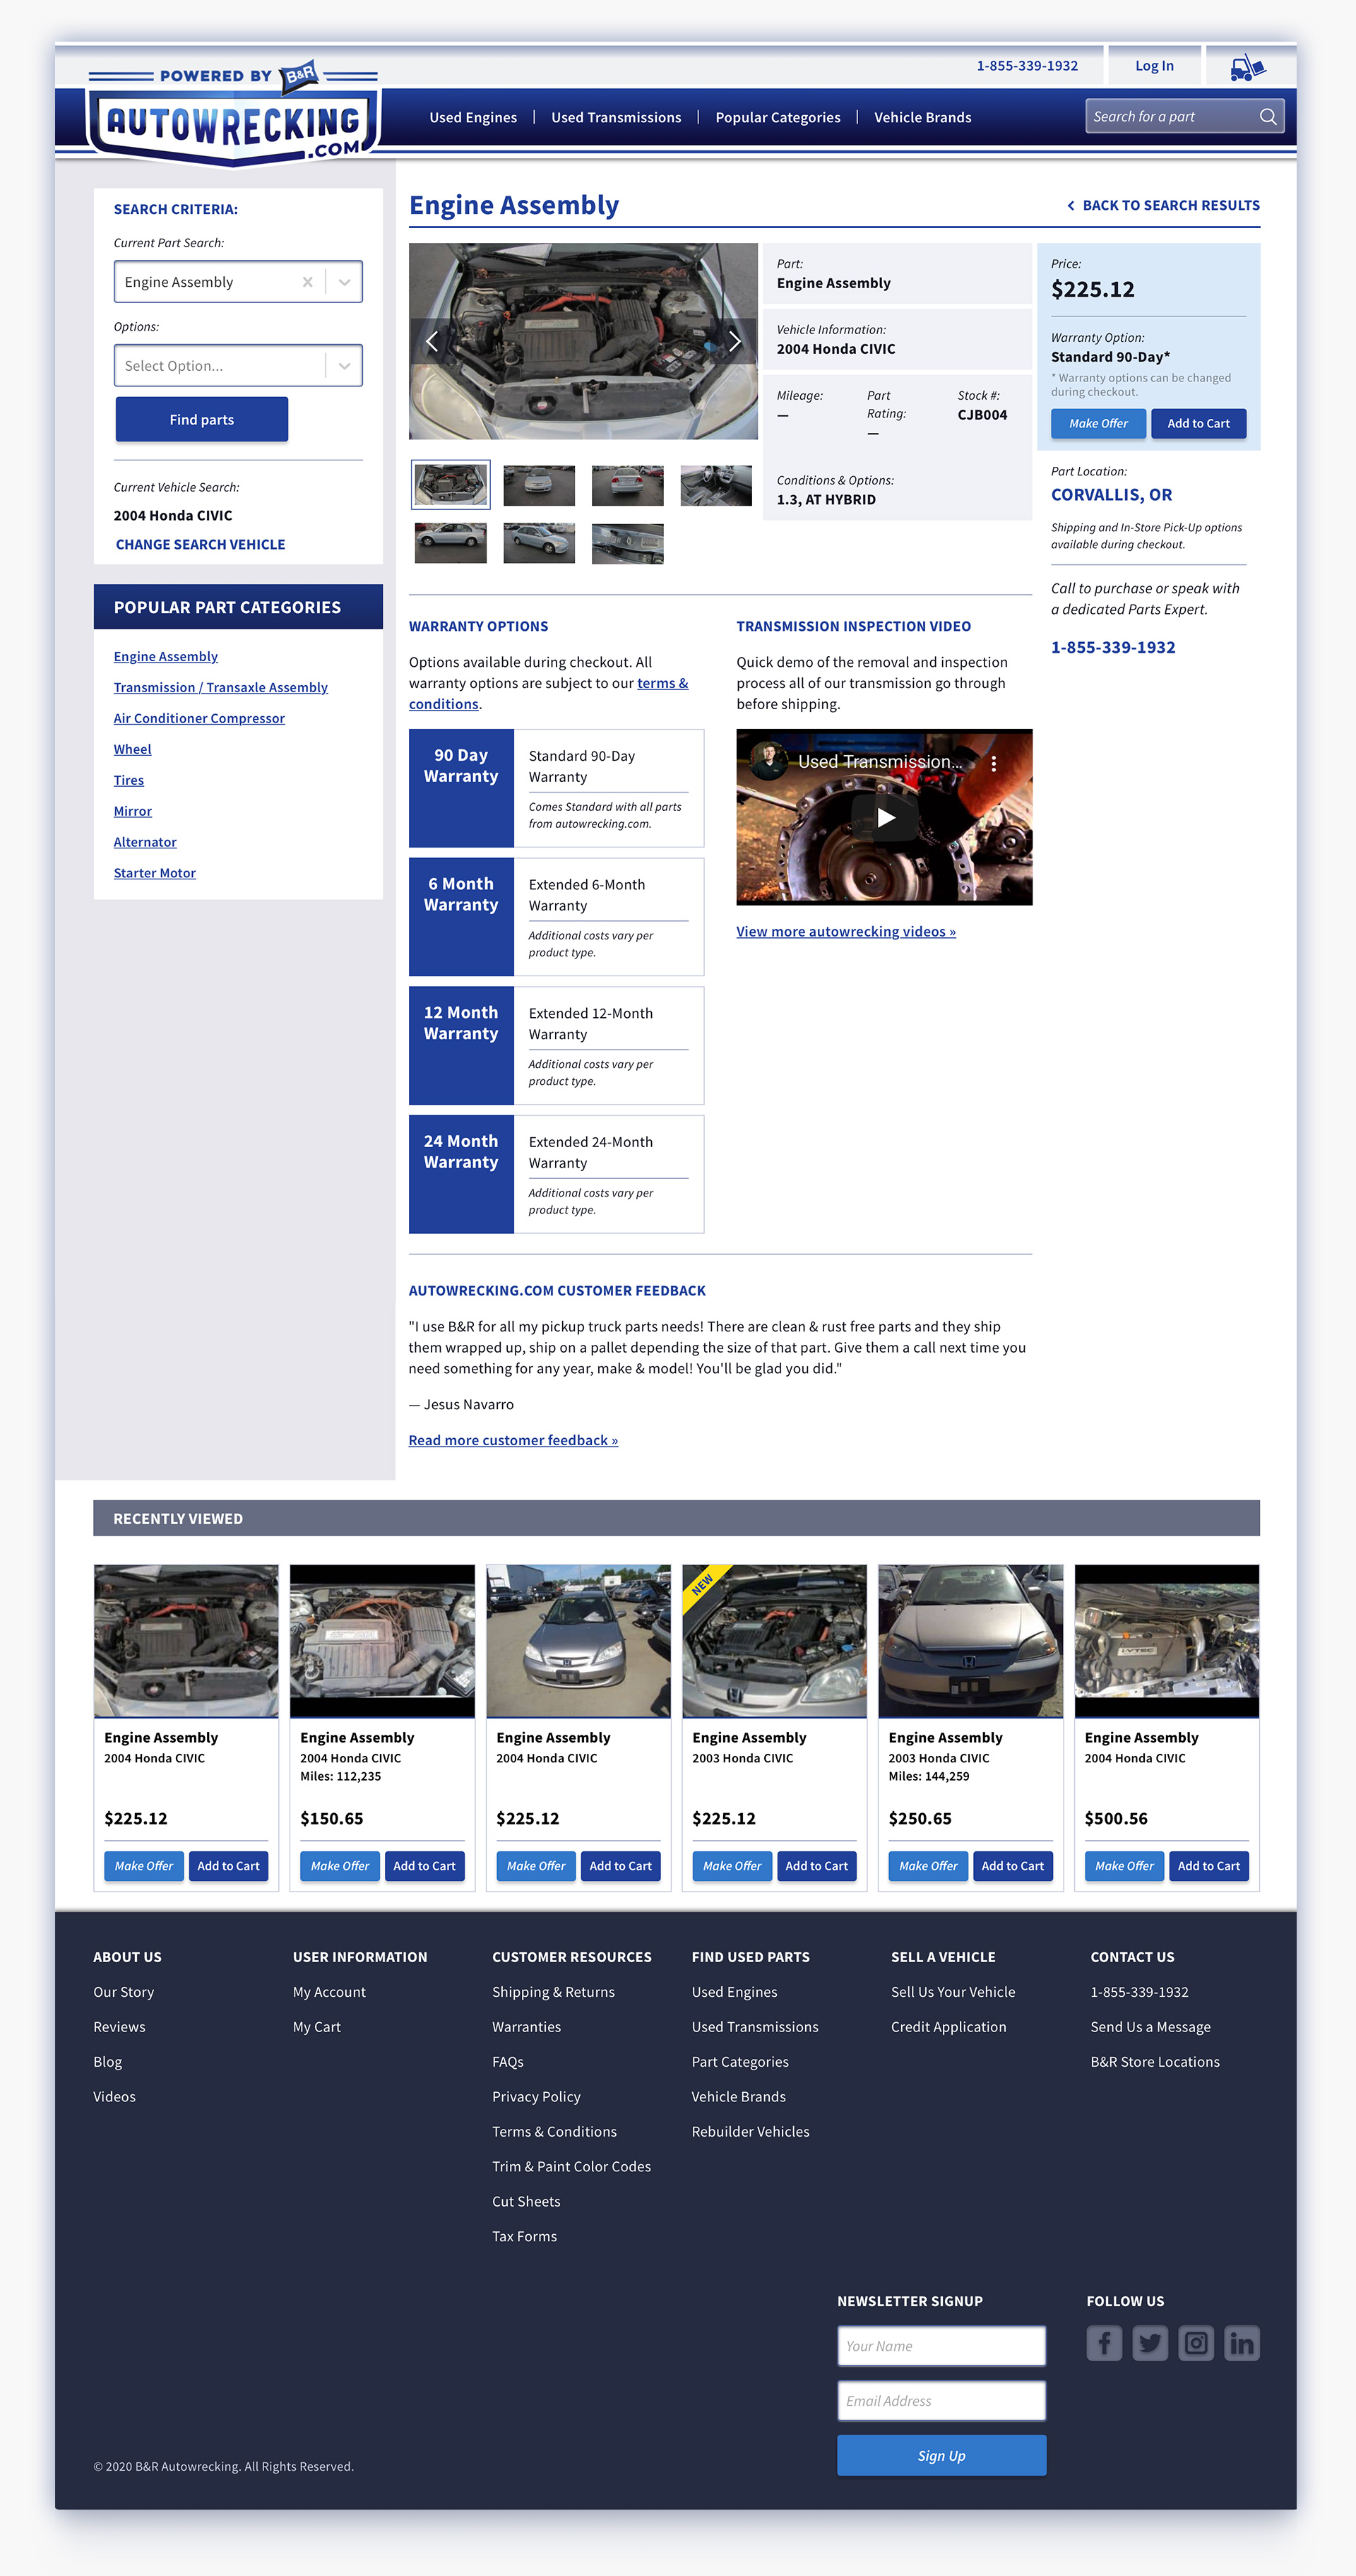 Product Page page design from Autowrecking.com website designed by Incubate Design